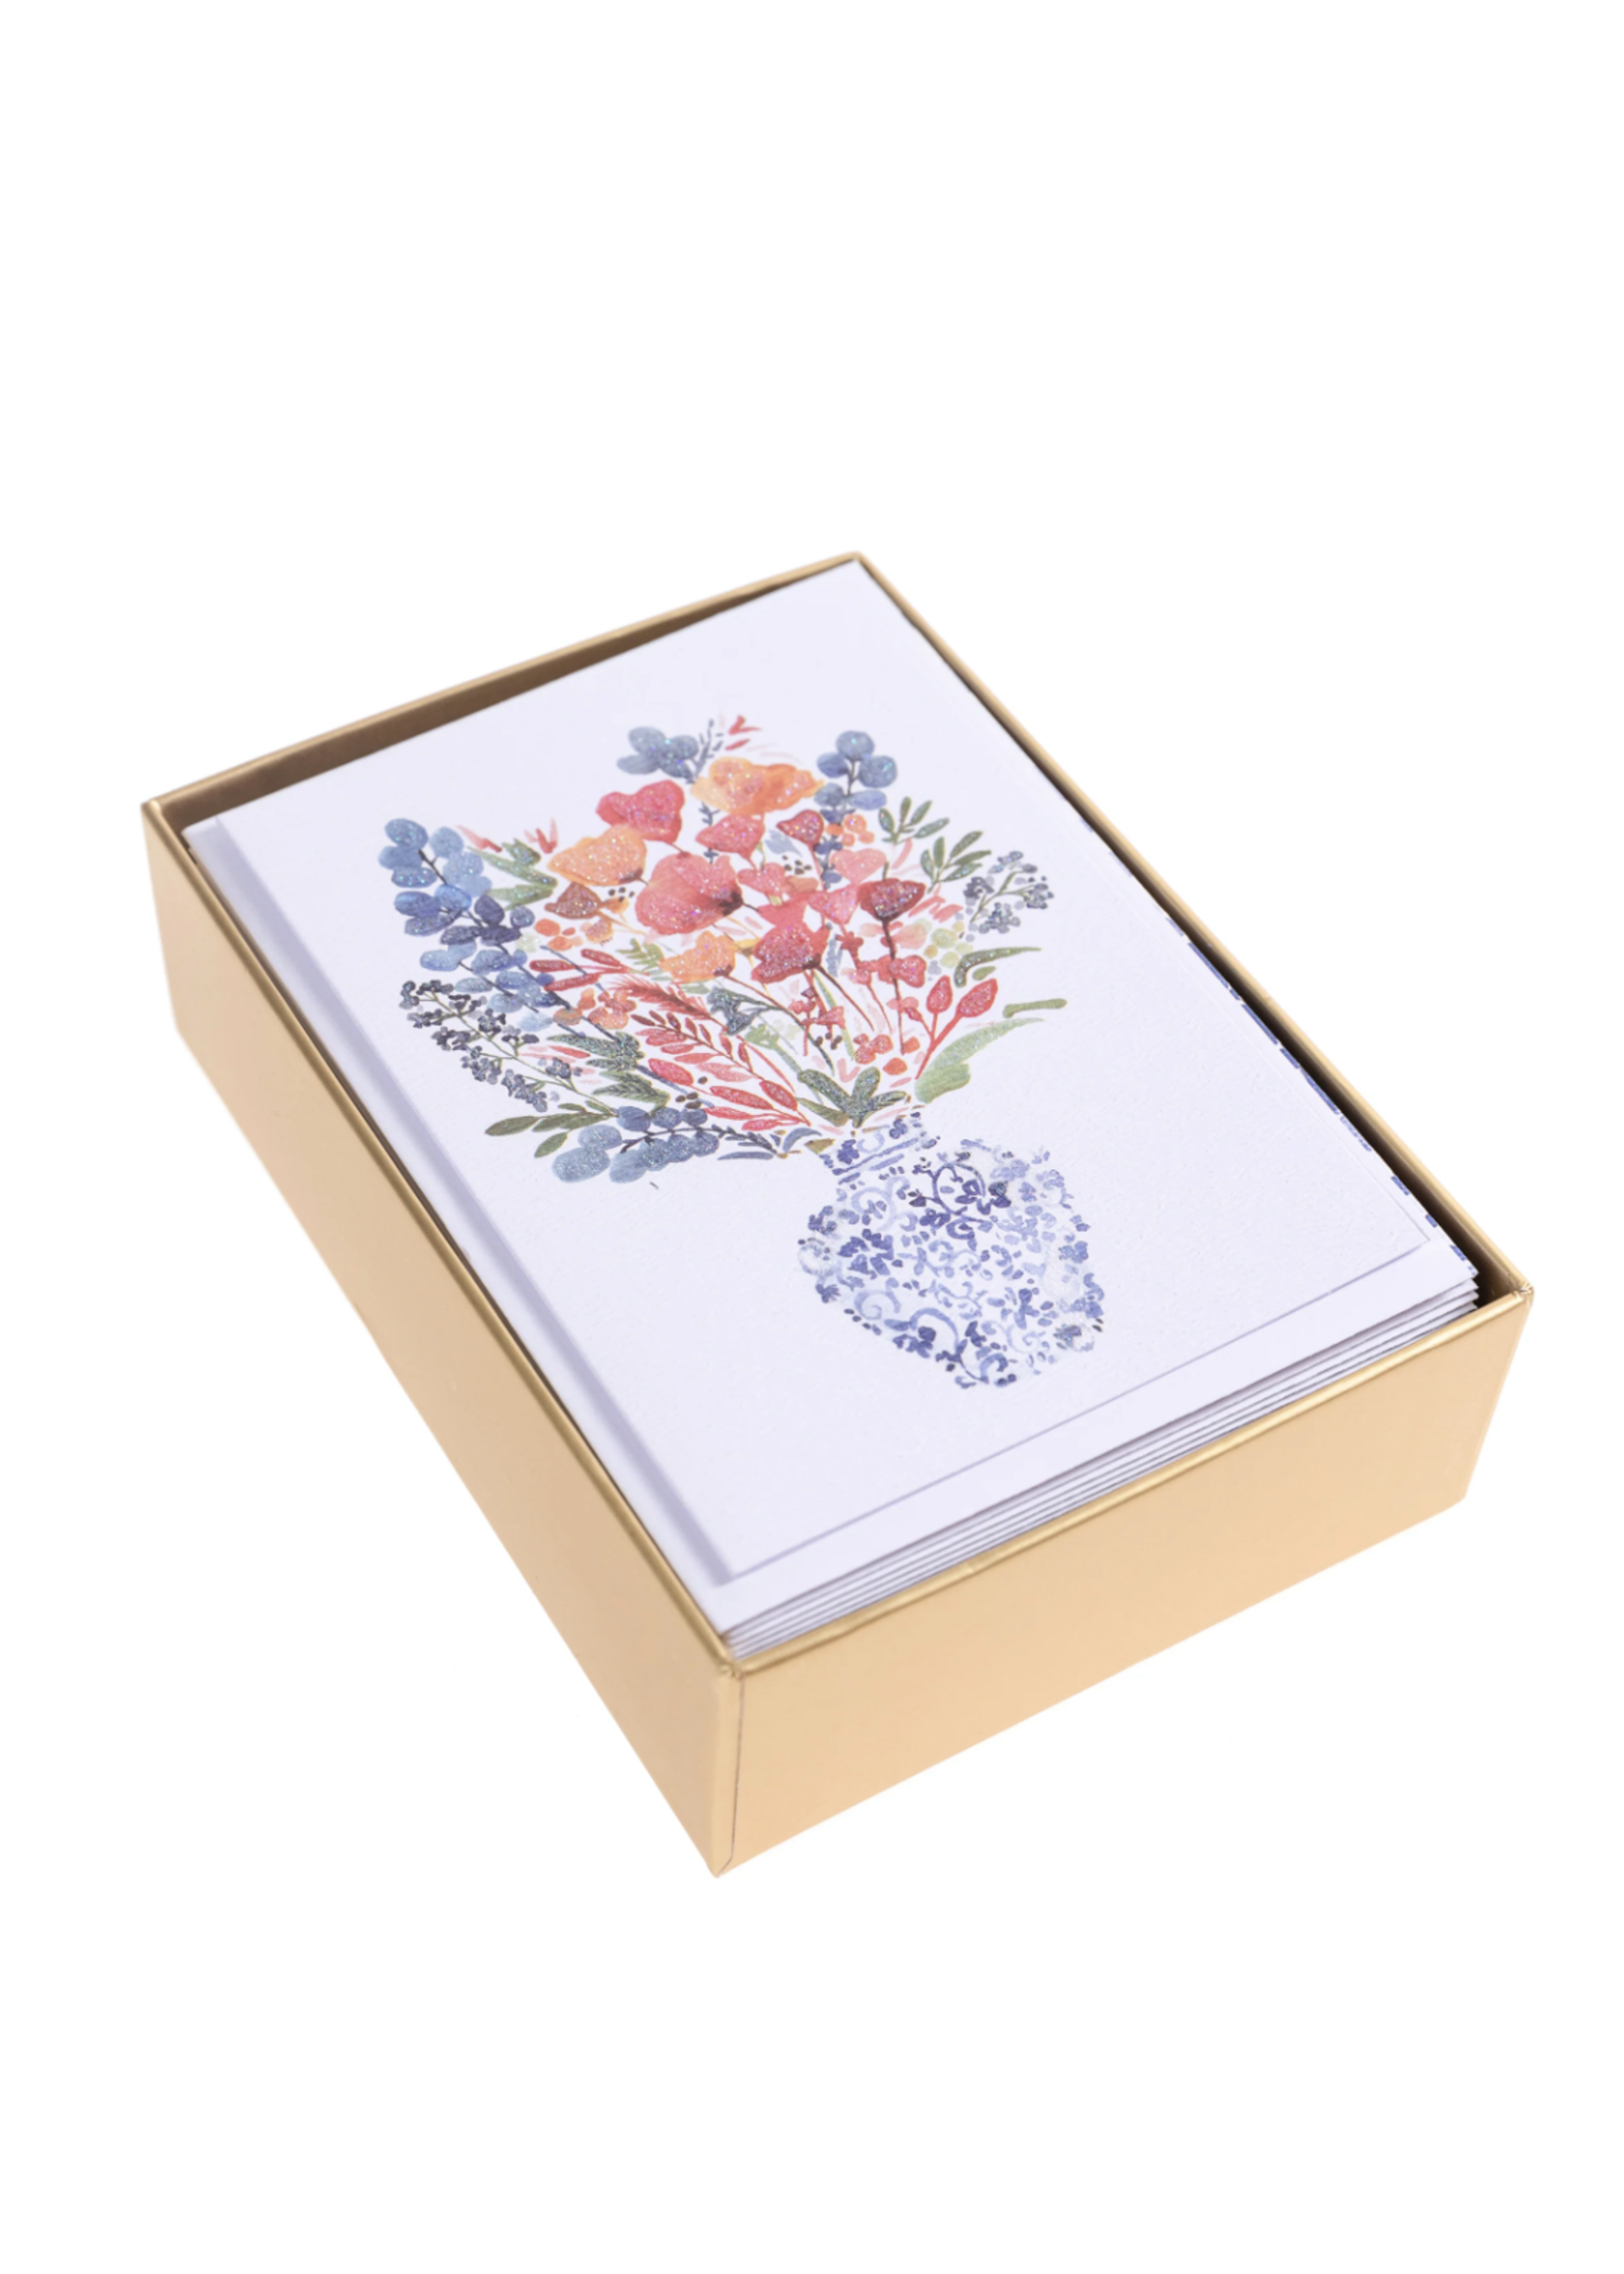 Graphique Floral Vase Box 16 Greeting Cards